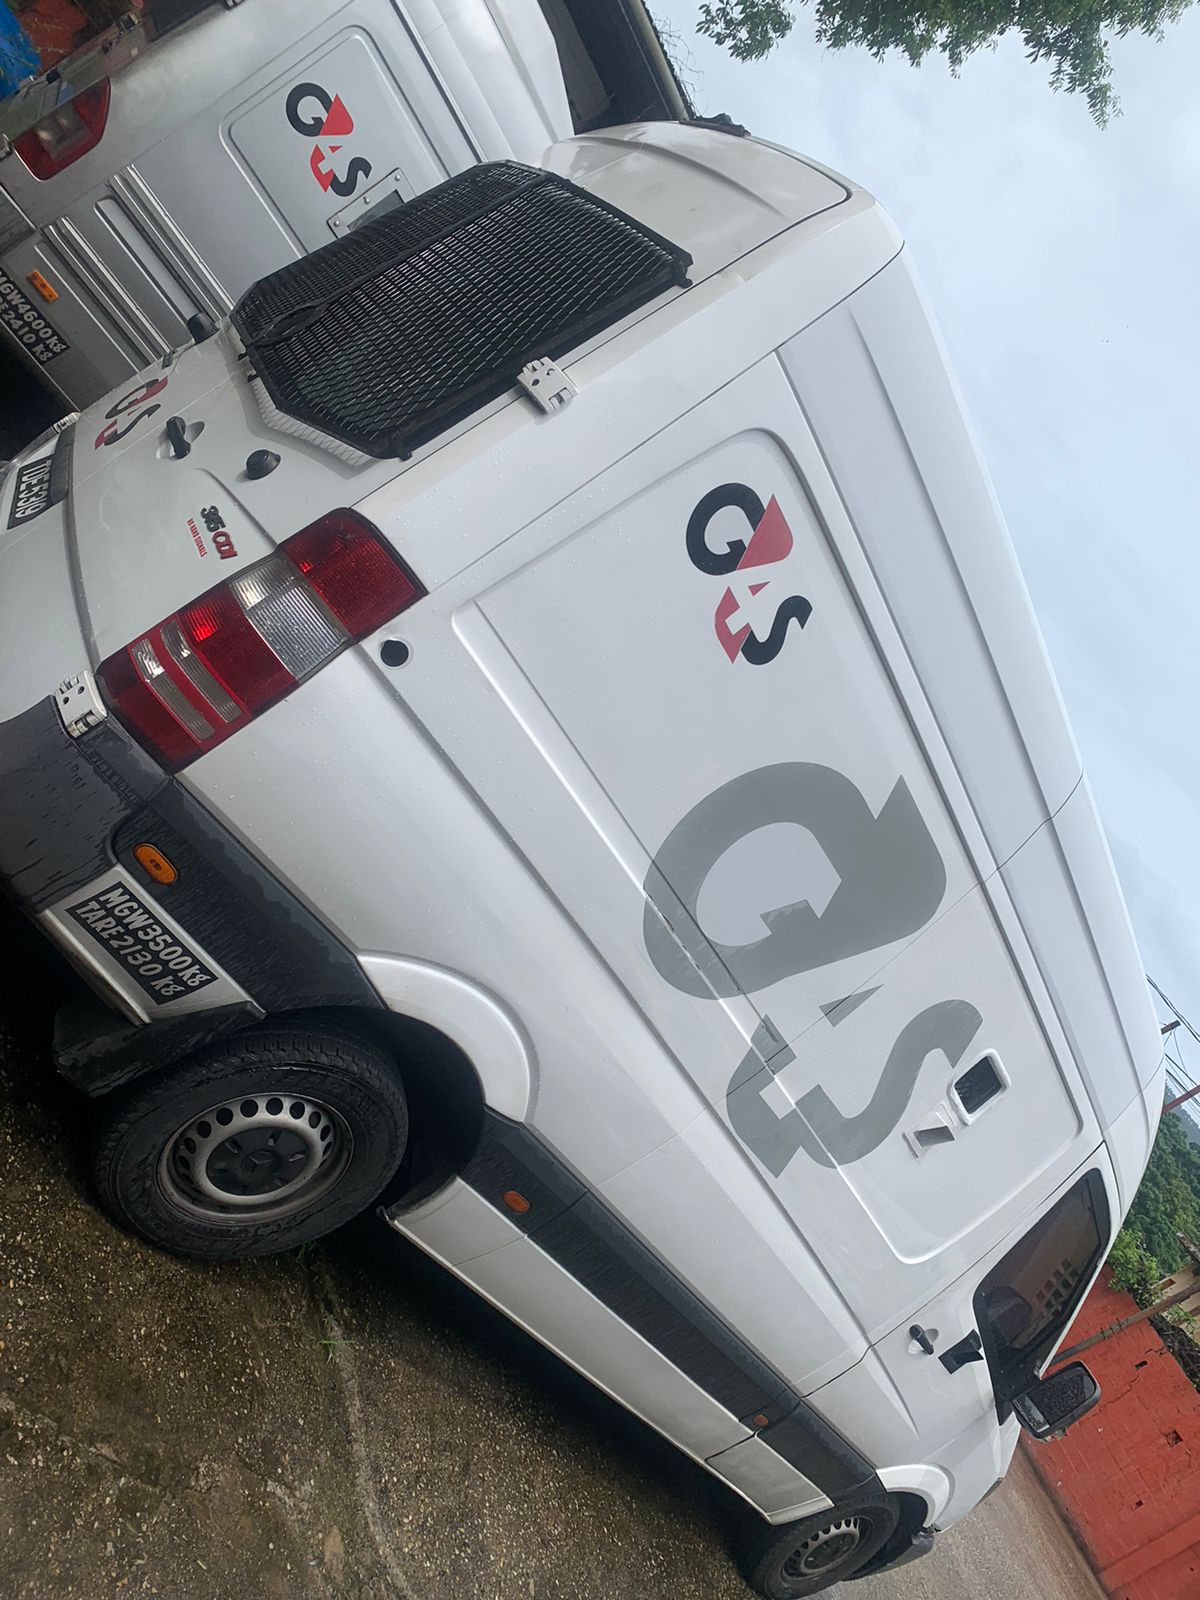 Image of a white vehicle with G4S logo